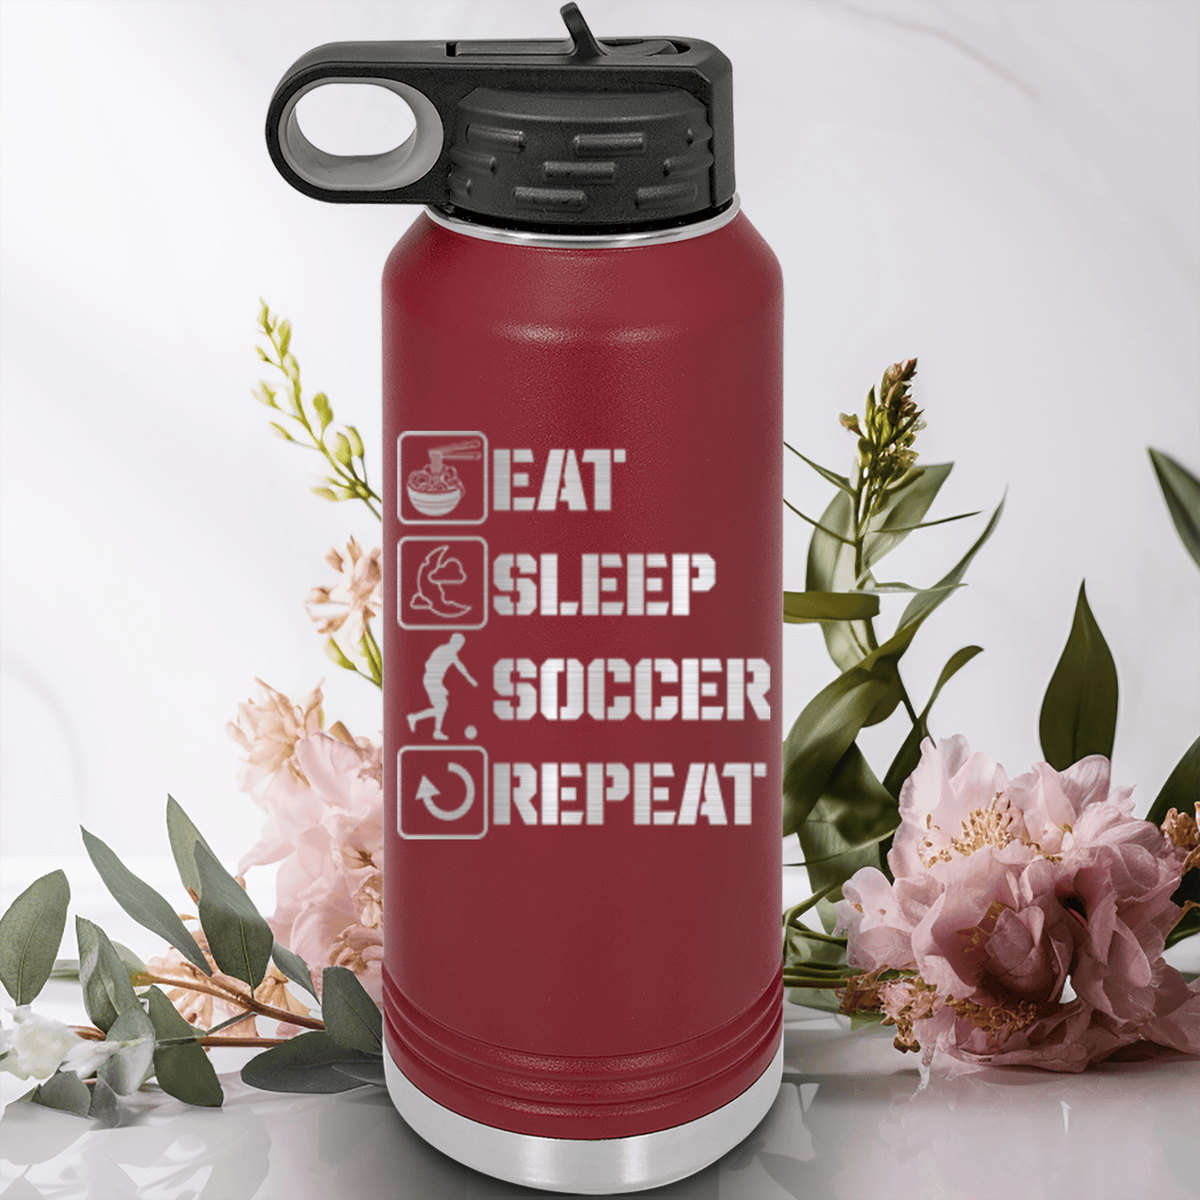 Maroon Soccer Water Bottle With Soccers Daily Rhythm Design